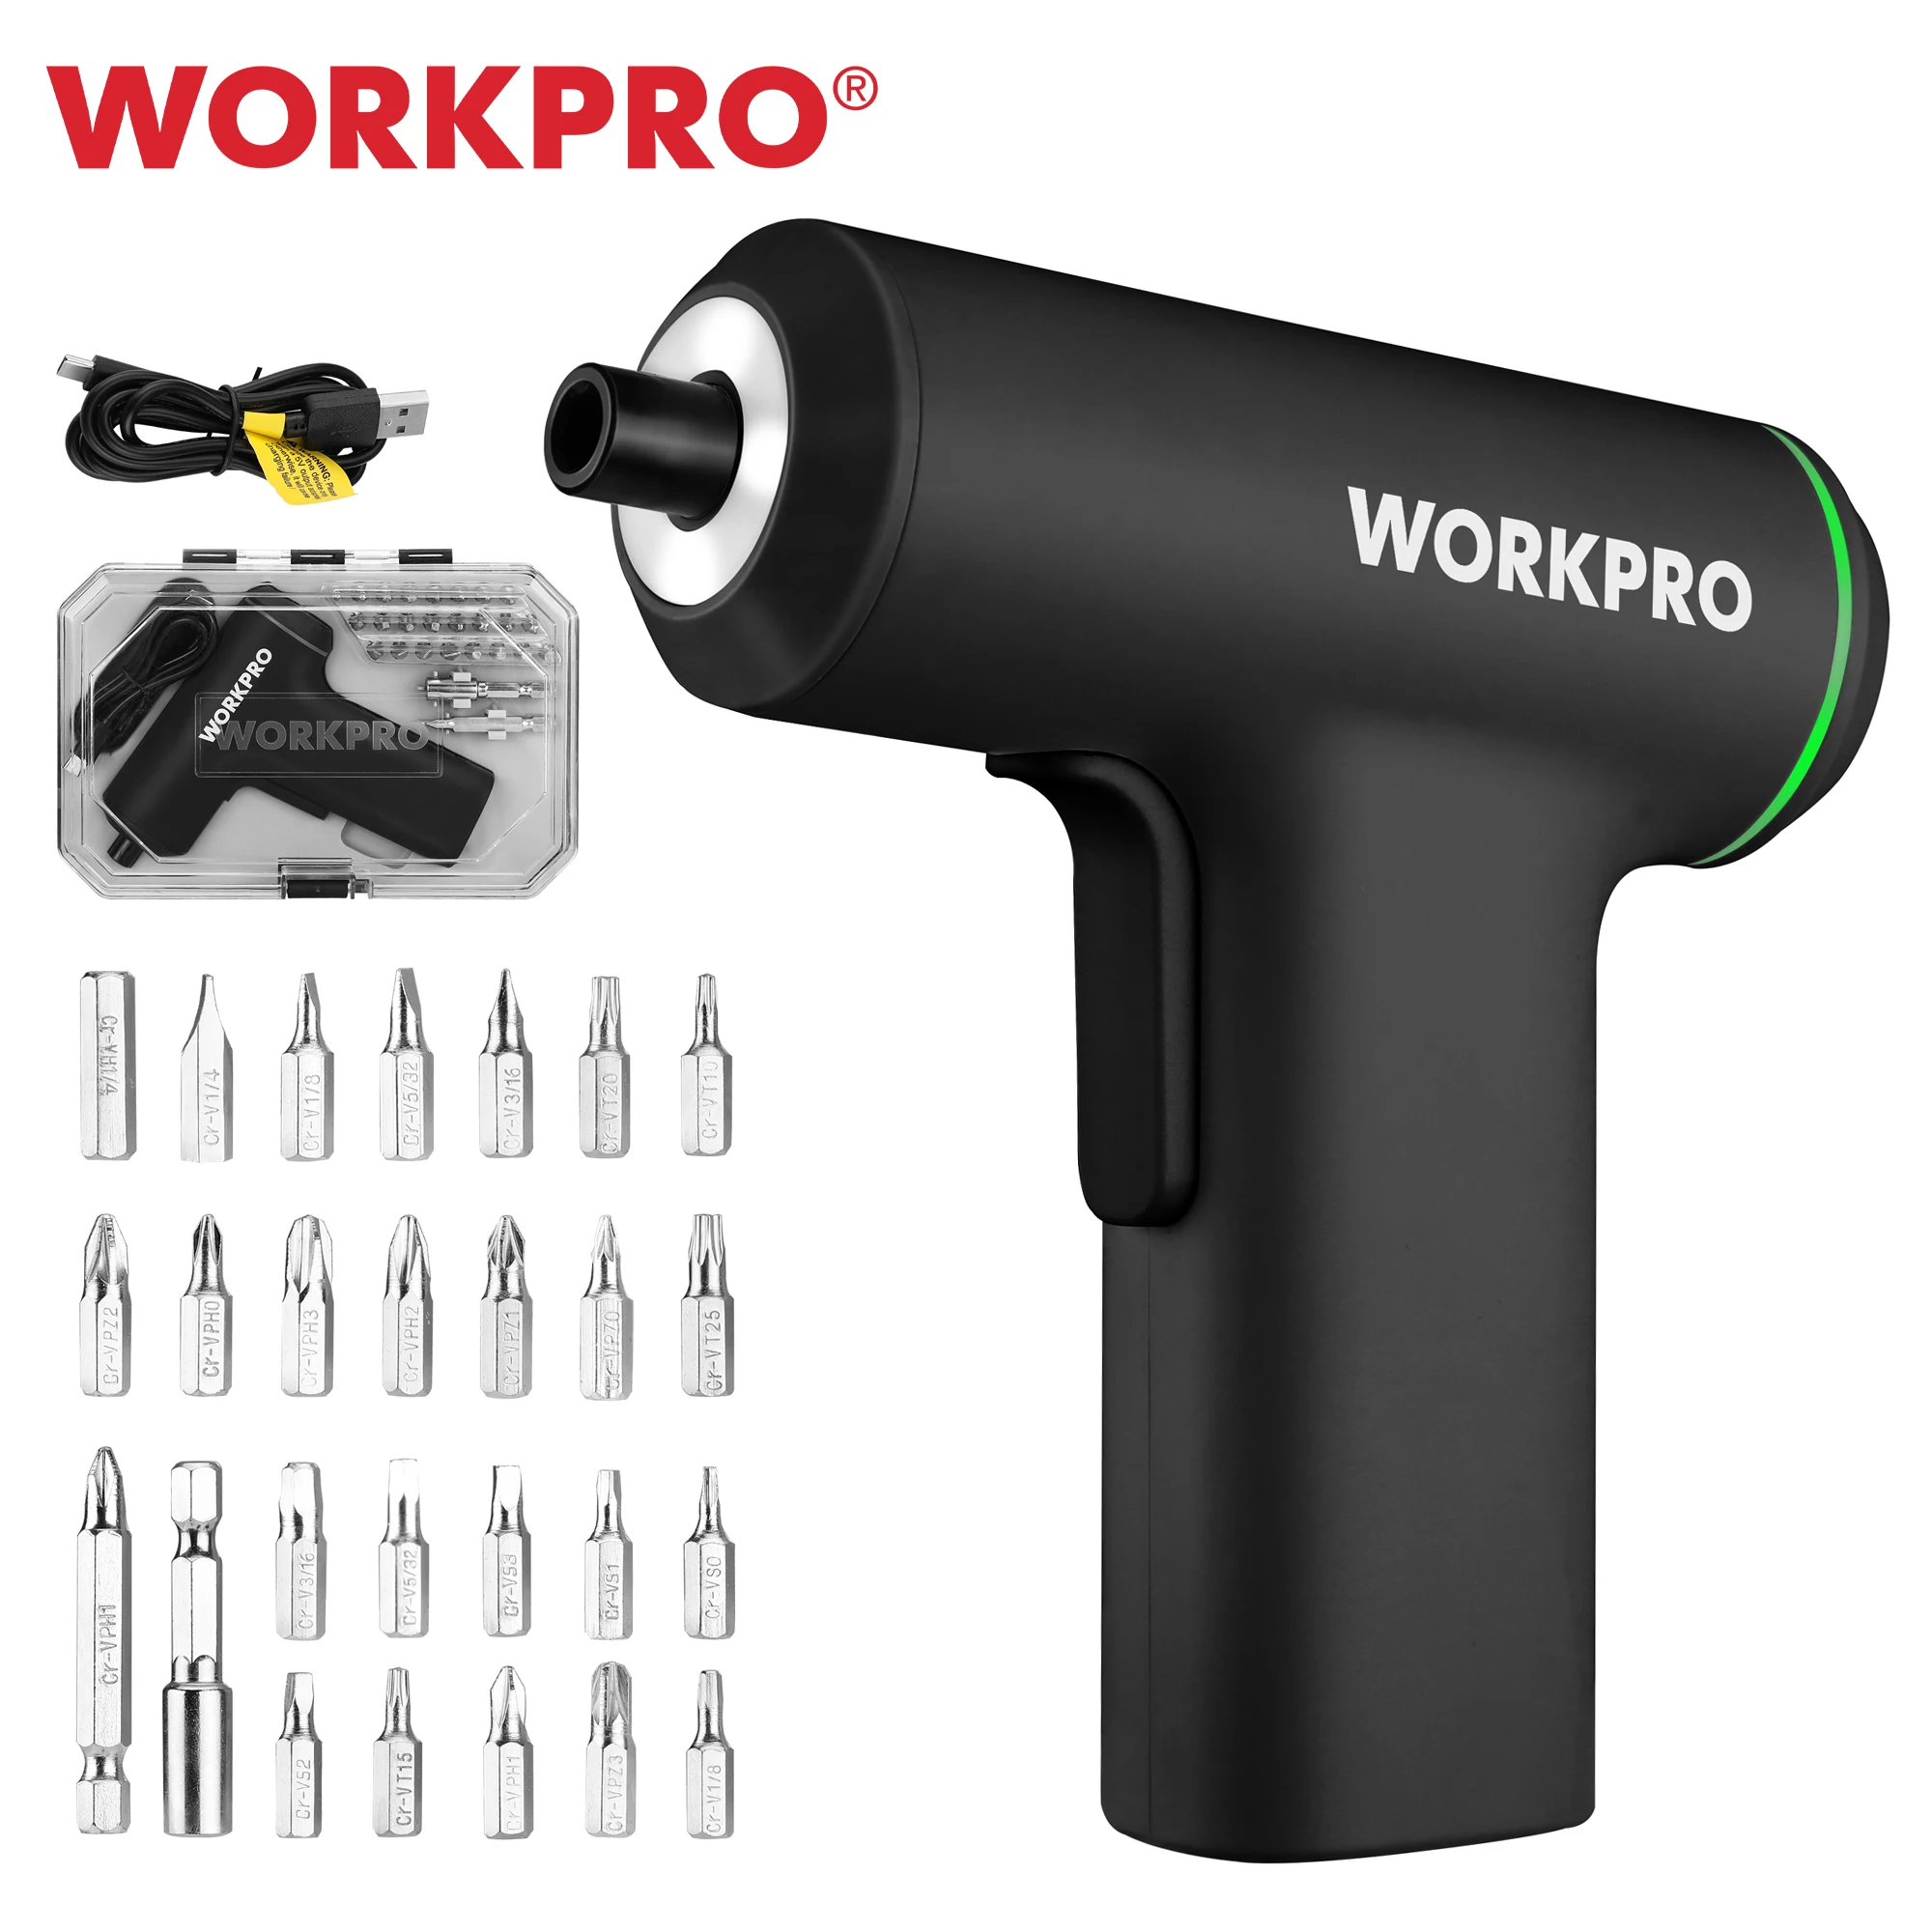 WORKPRO 3.6V Electric Cordless Screwdriver Set USB Rechargeable 1500mah Lithium-ion Battery Mini Drill Power tool Set ce rohs 3 7v lithium polymer battery 1500mah c430 gps navigator 484251 recorder